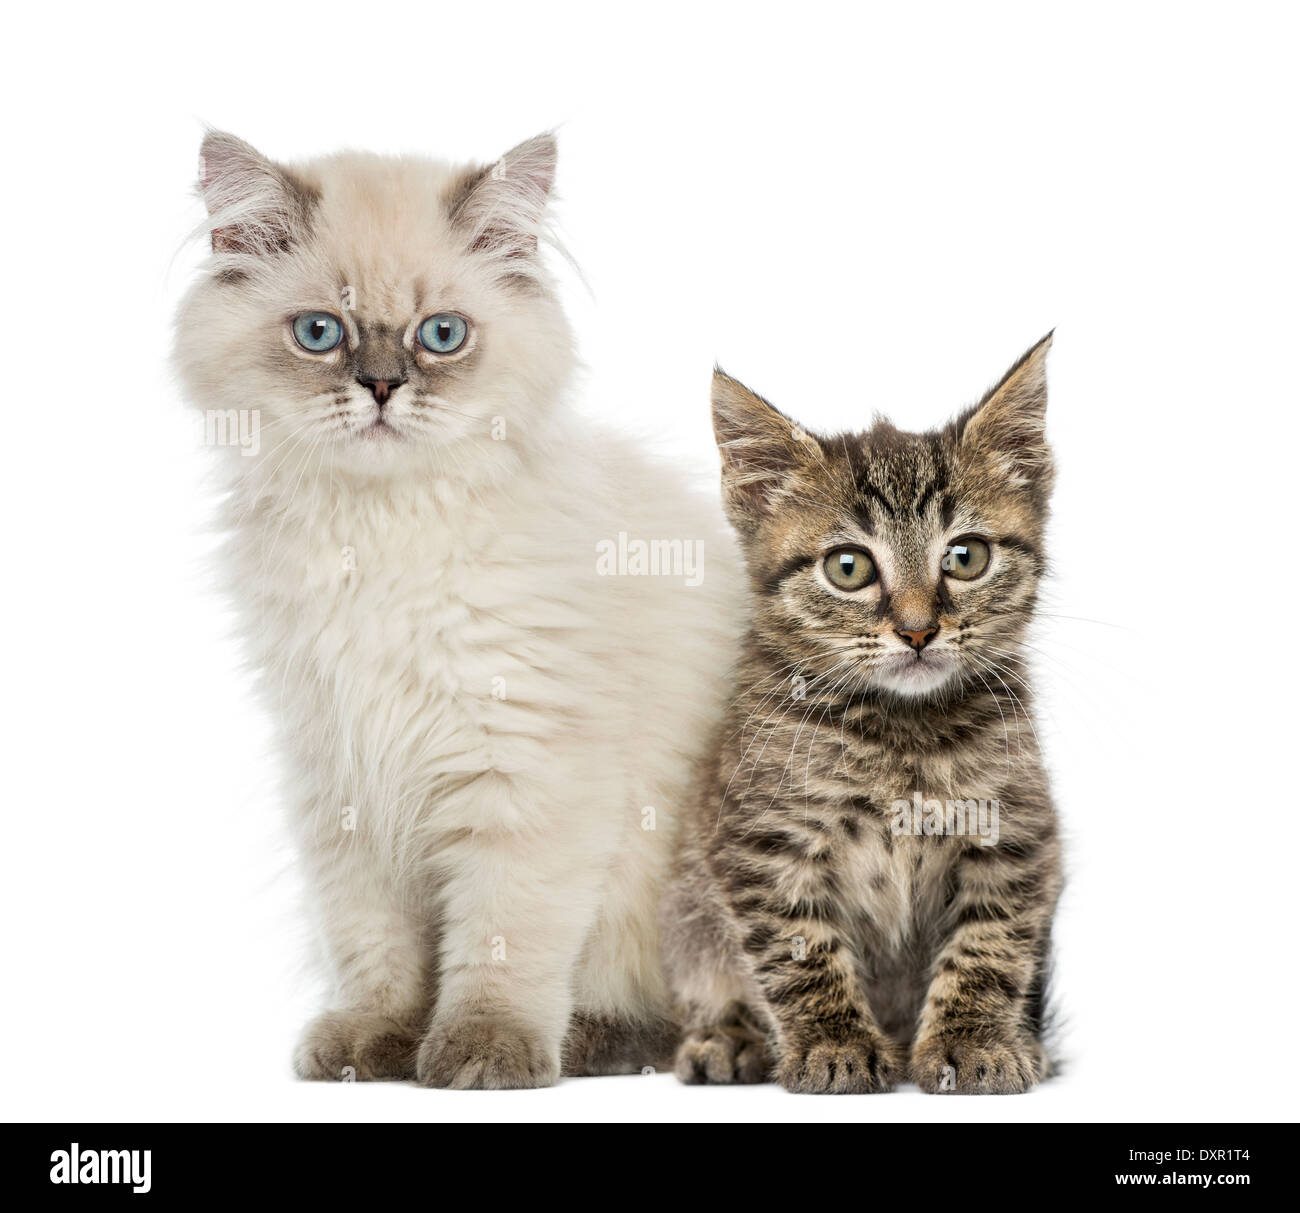 European shorthair and British shorthair kitten sitting and looking at the camera against white background Stock Photo